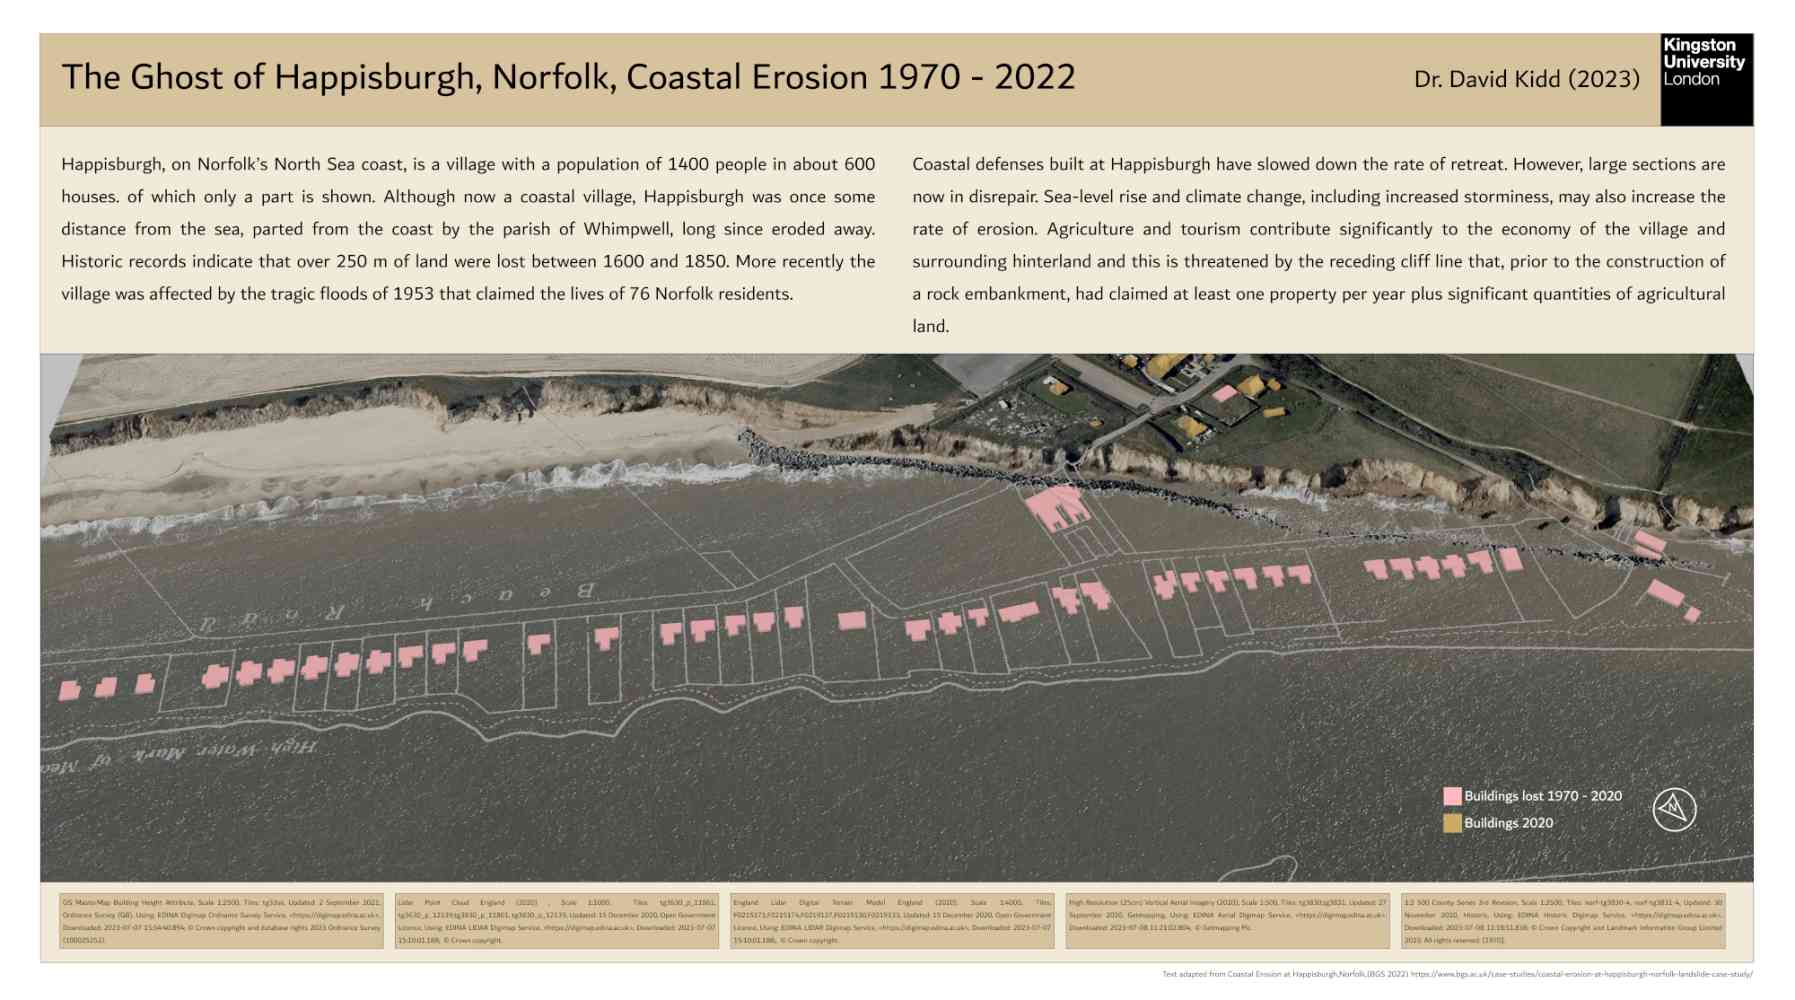 The Ghost of Happisburgh, Norfolk. Coastal Erosion 1970 - 2022. - Visualising change can be tricky. This ArcGIS 3D Scene uses high-resolution 50cm lidar point cloud, 1m lidar DEM, 25cm aerial photography, OS Mastermap building polygons 2020, and a 1970 historic OS 1:2,000 Country Series map. 2020 building are multipatch features built from the Mastermap building footprints and the lidar point cloud. Buildings not on the 2020 map were digitised from the historic map.